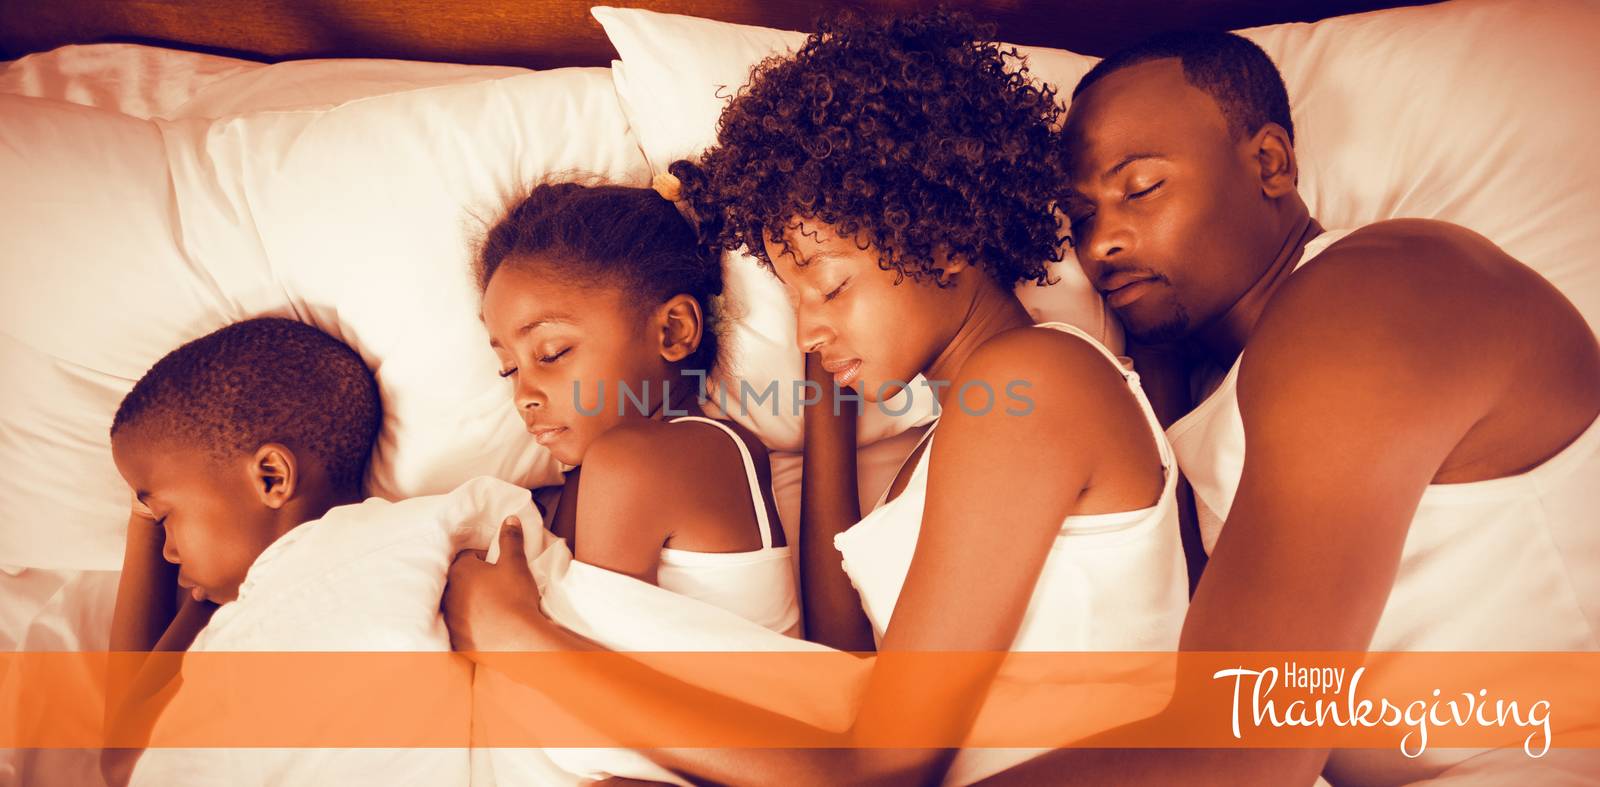 Illustration of happy thanksgiving day text greeting against overhead view of peaceful family sleeping